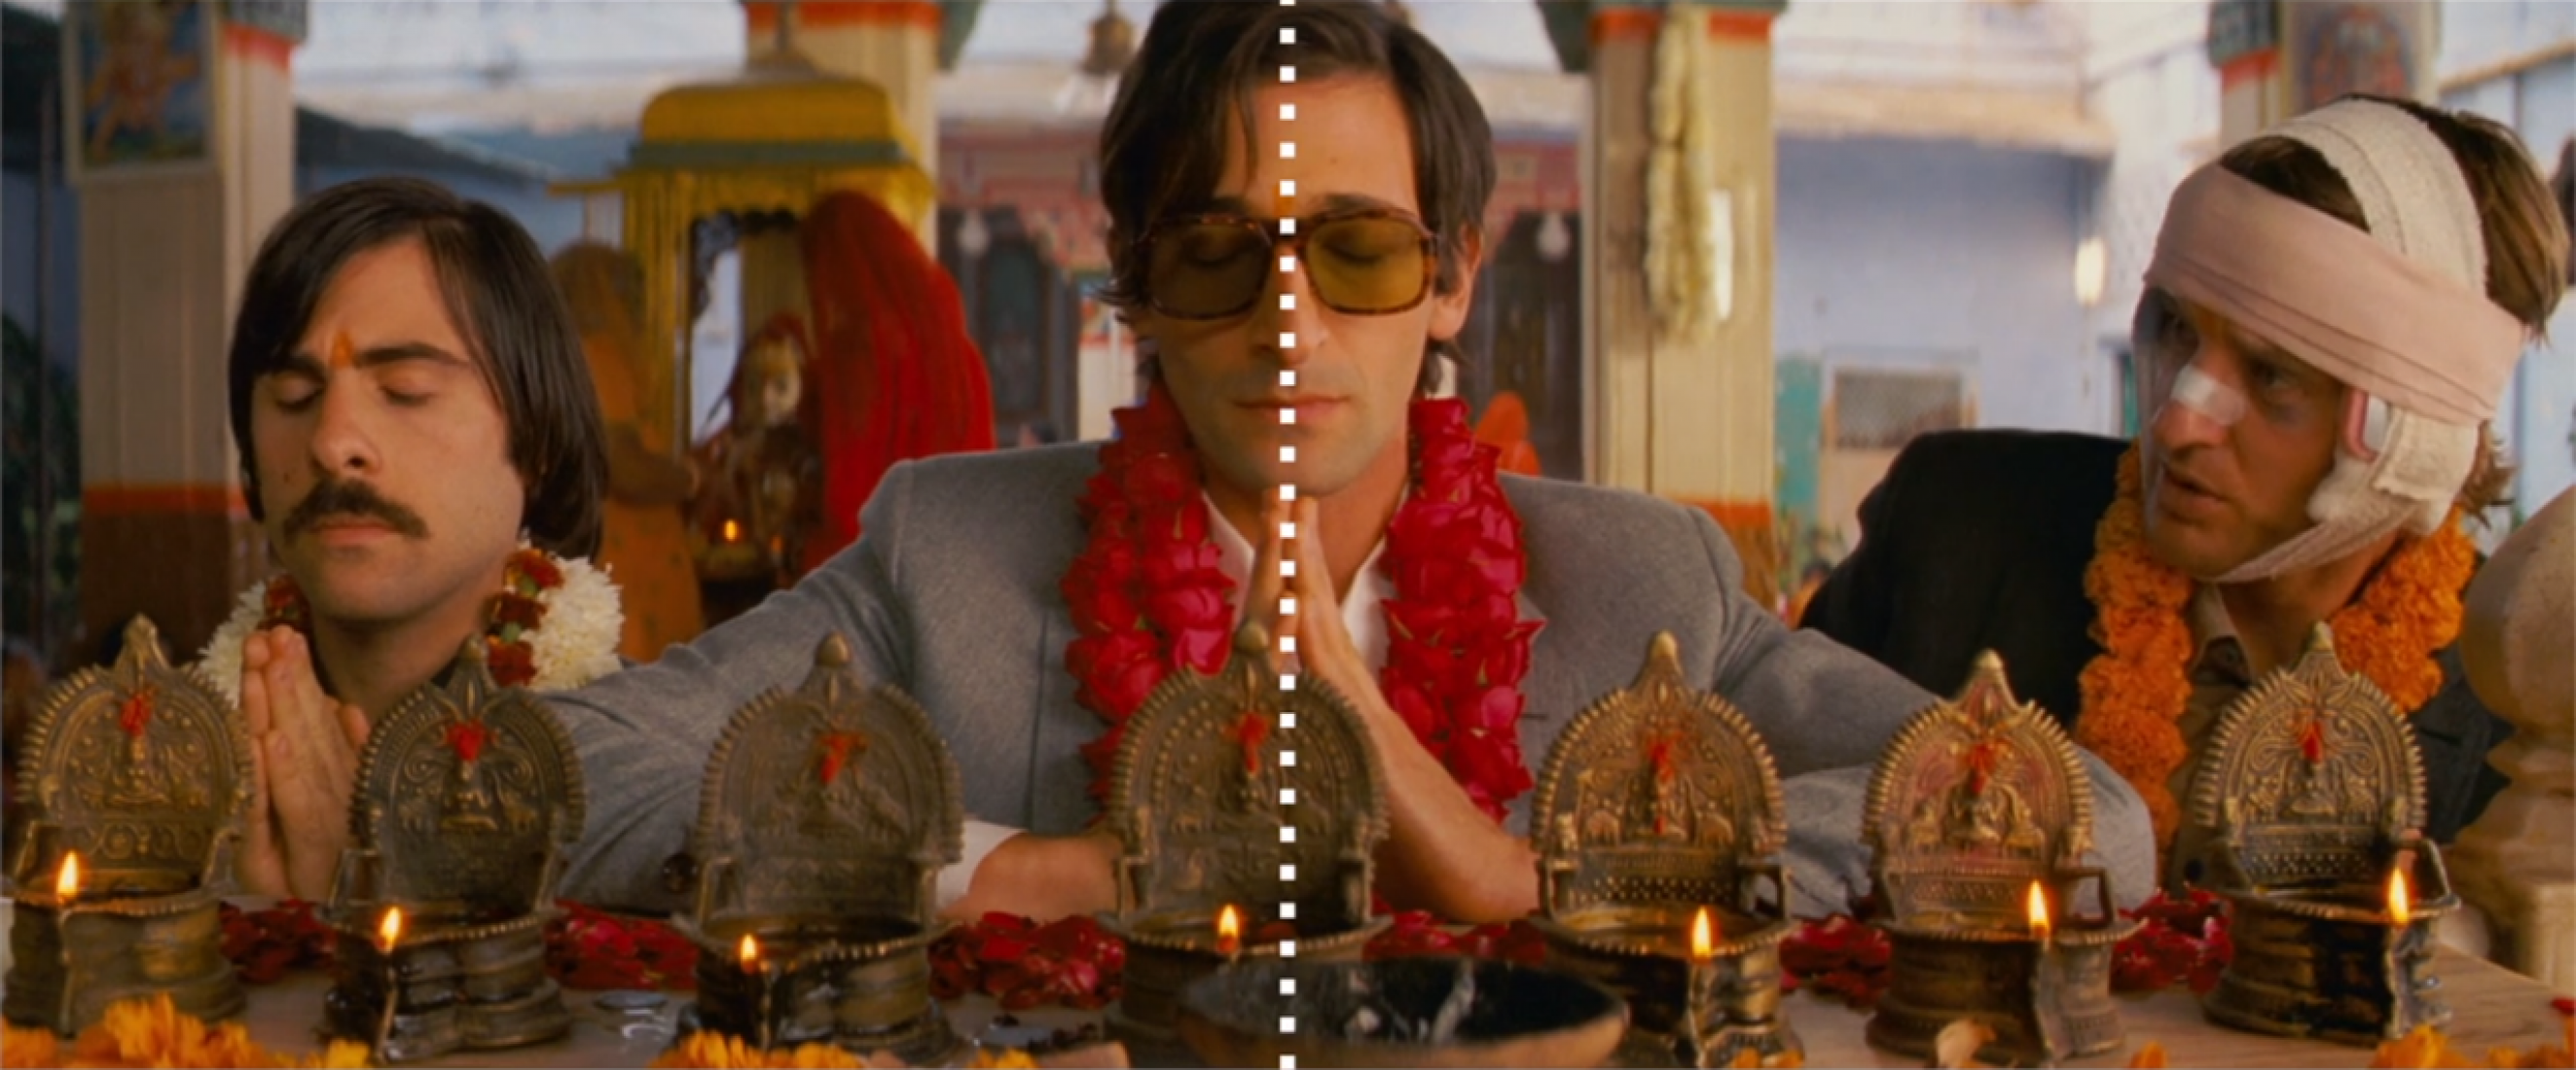 CinemaGrids on X: Symmetry in the Films of Wes Anderson: THE LIFE